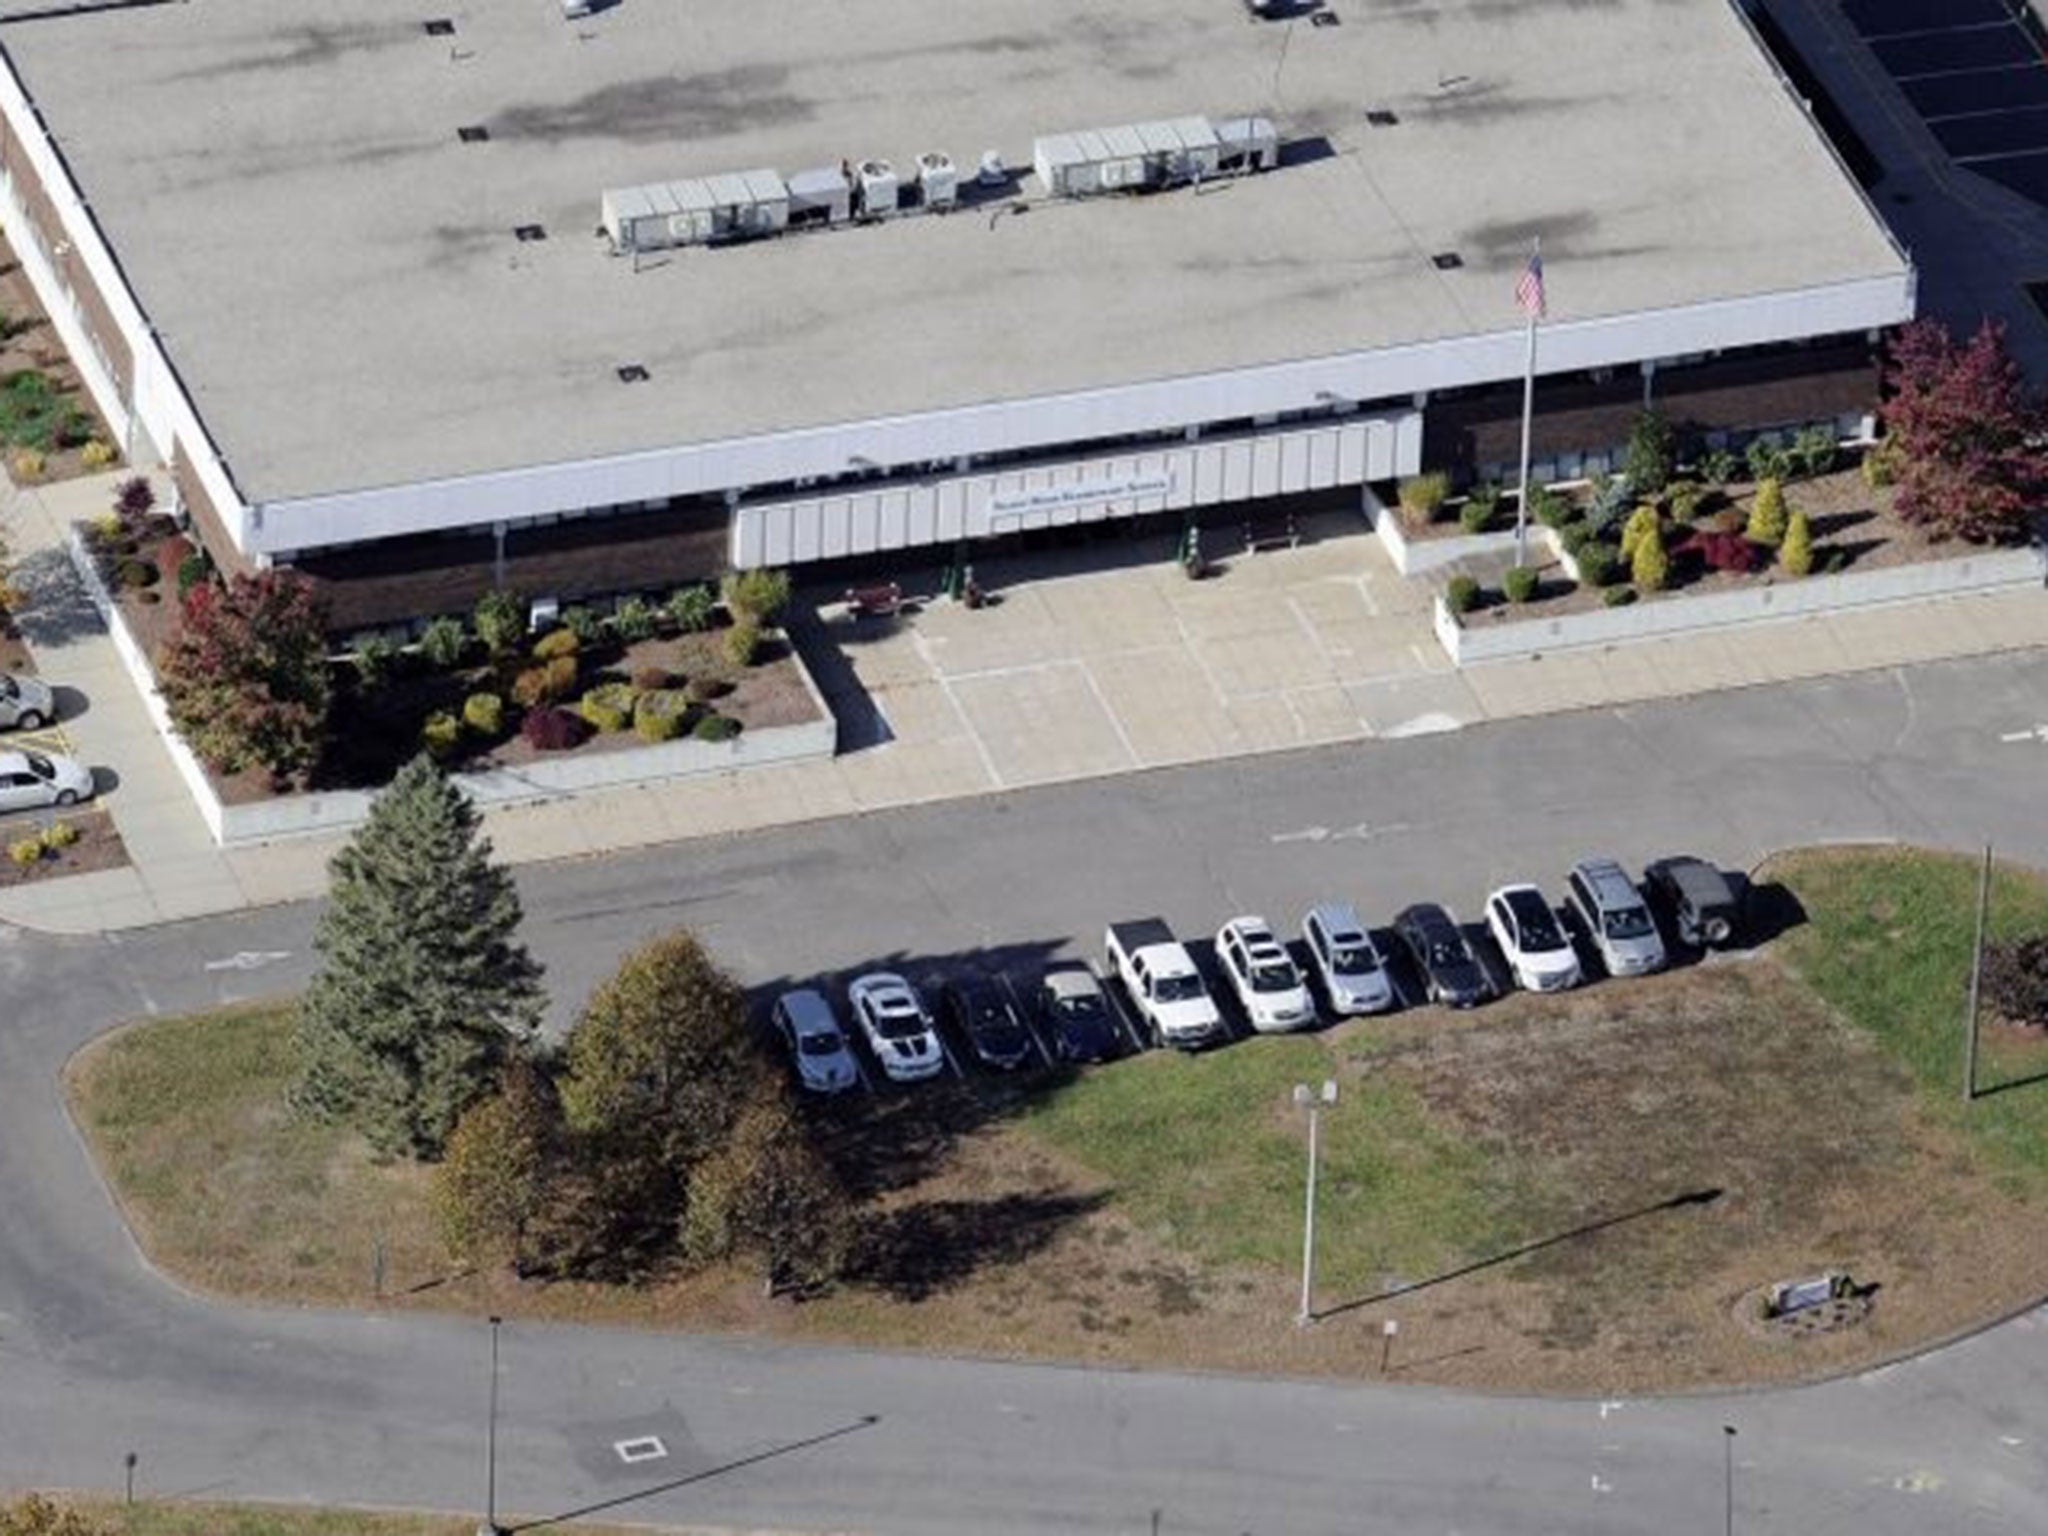 &#13;
The Sandy Hook Elementary School building where 26 children and adults were killed &#13;